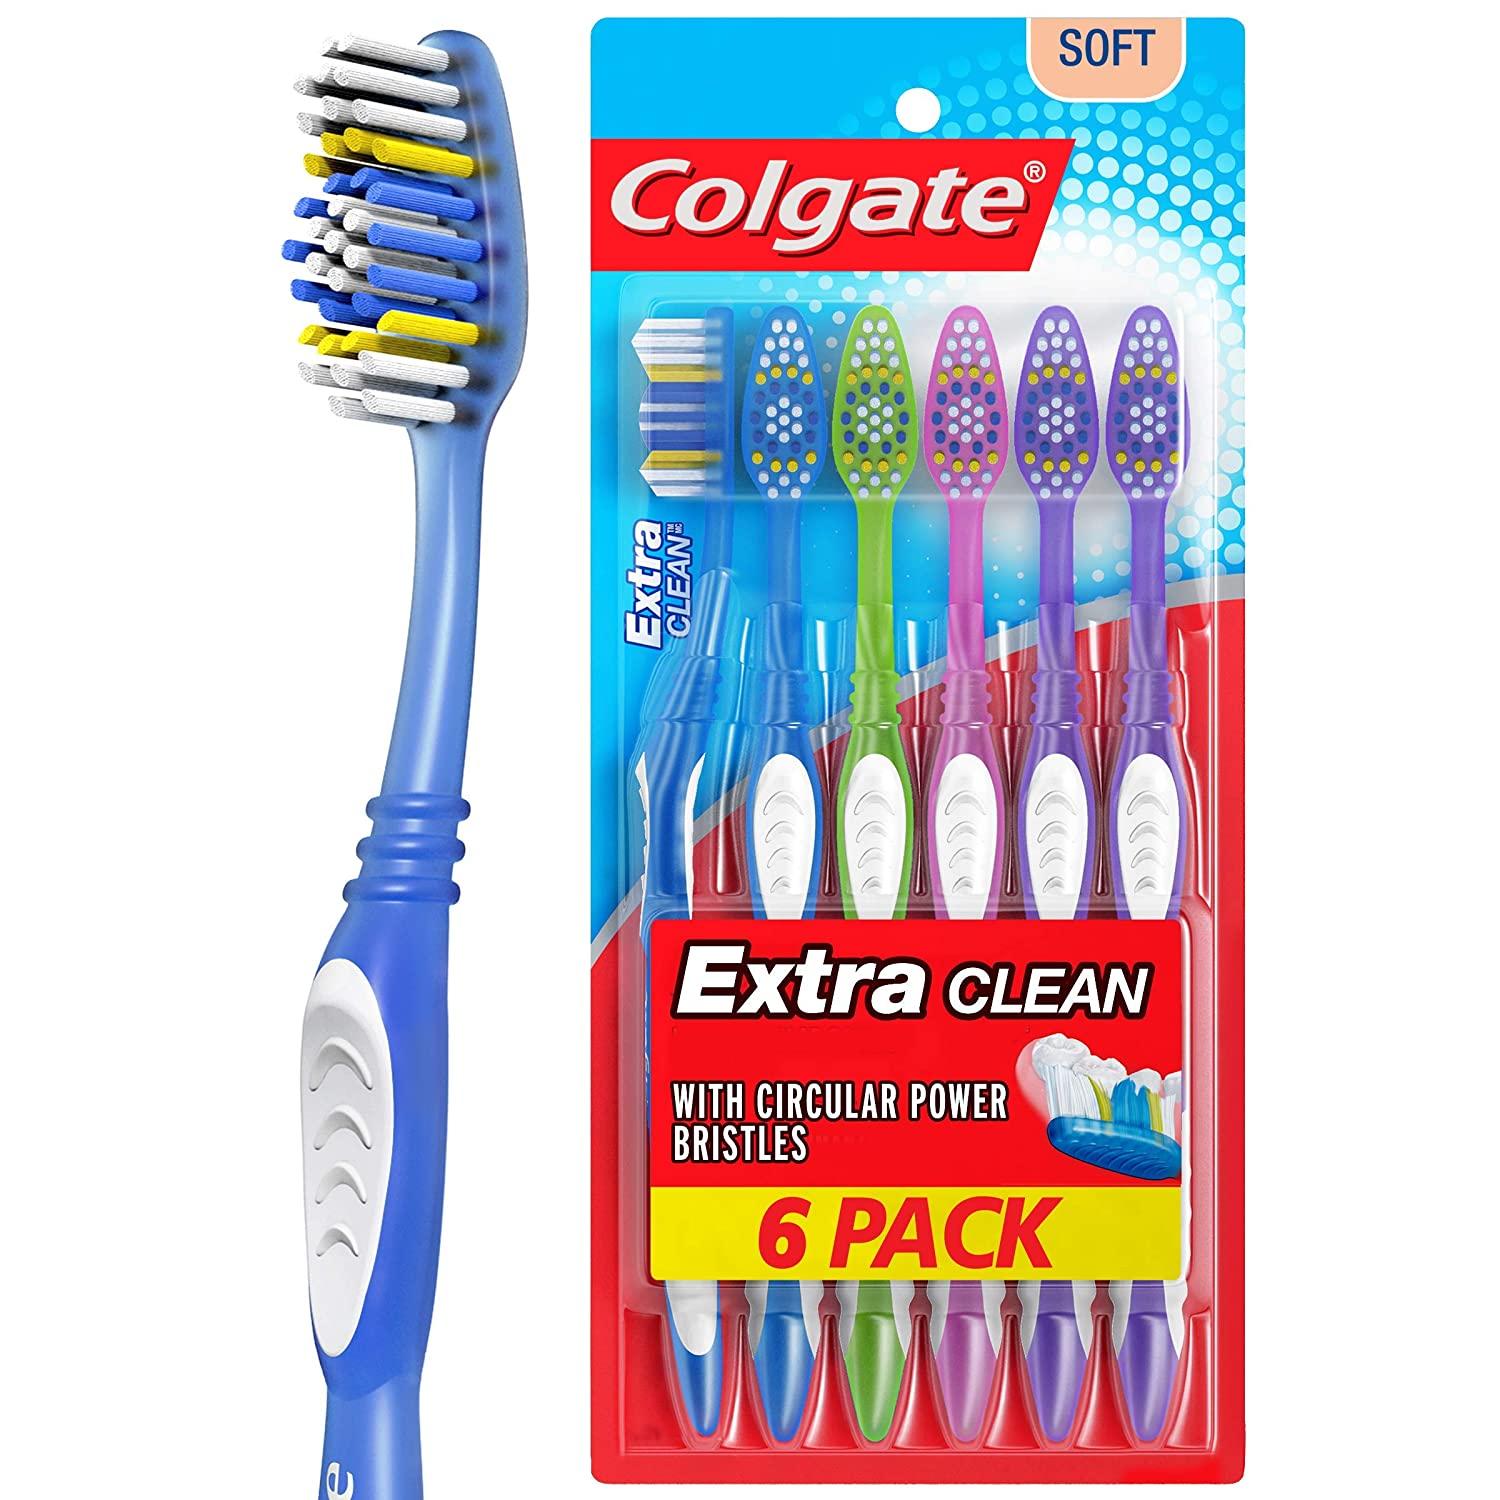 18 Colgate Extra Clean Toothbrushes for $6.94 Shipped